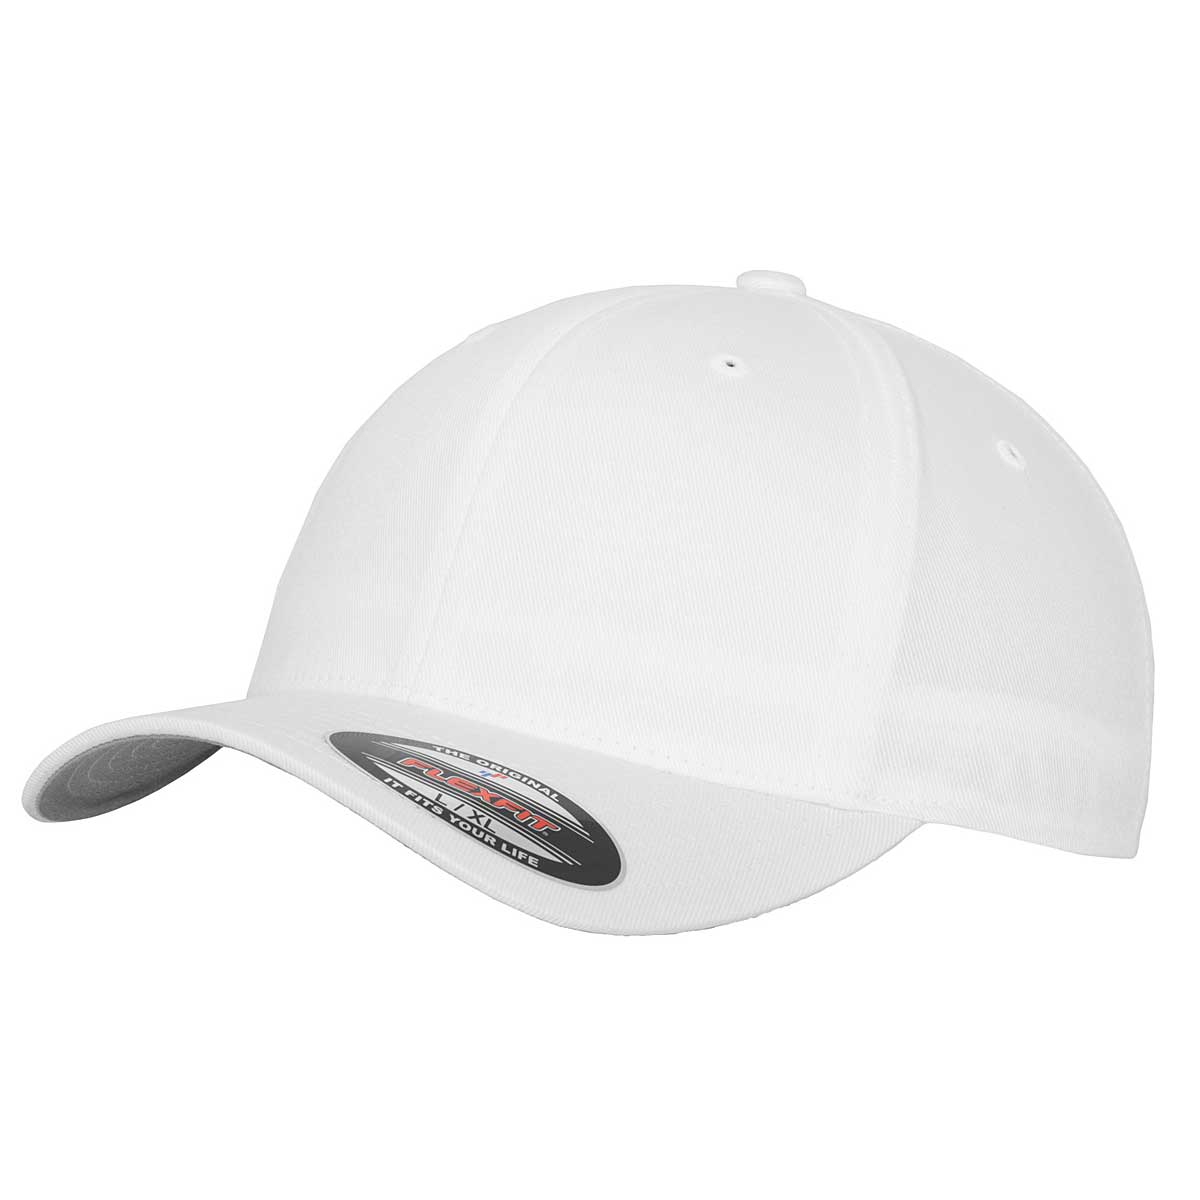 GBP 12.90 on Cheap cap COMBED logo-embroidered - jersey Buy Grigio CAP Ilunionhotels Outlet! Jordan WOOLY 